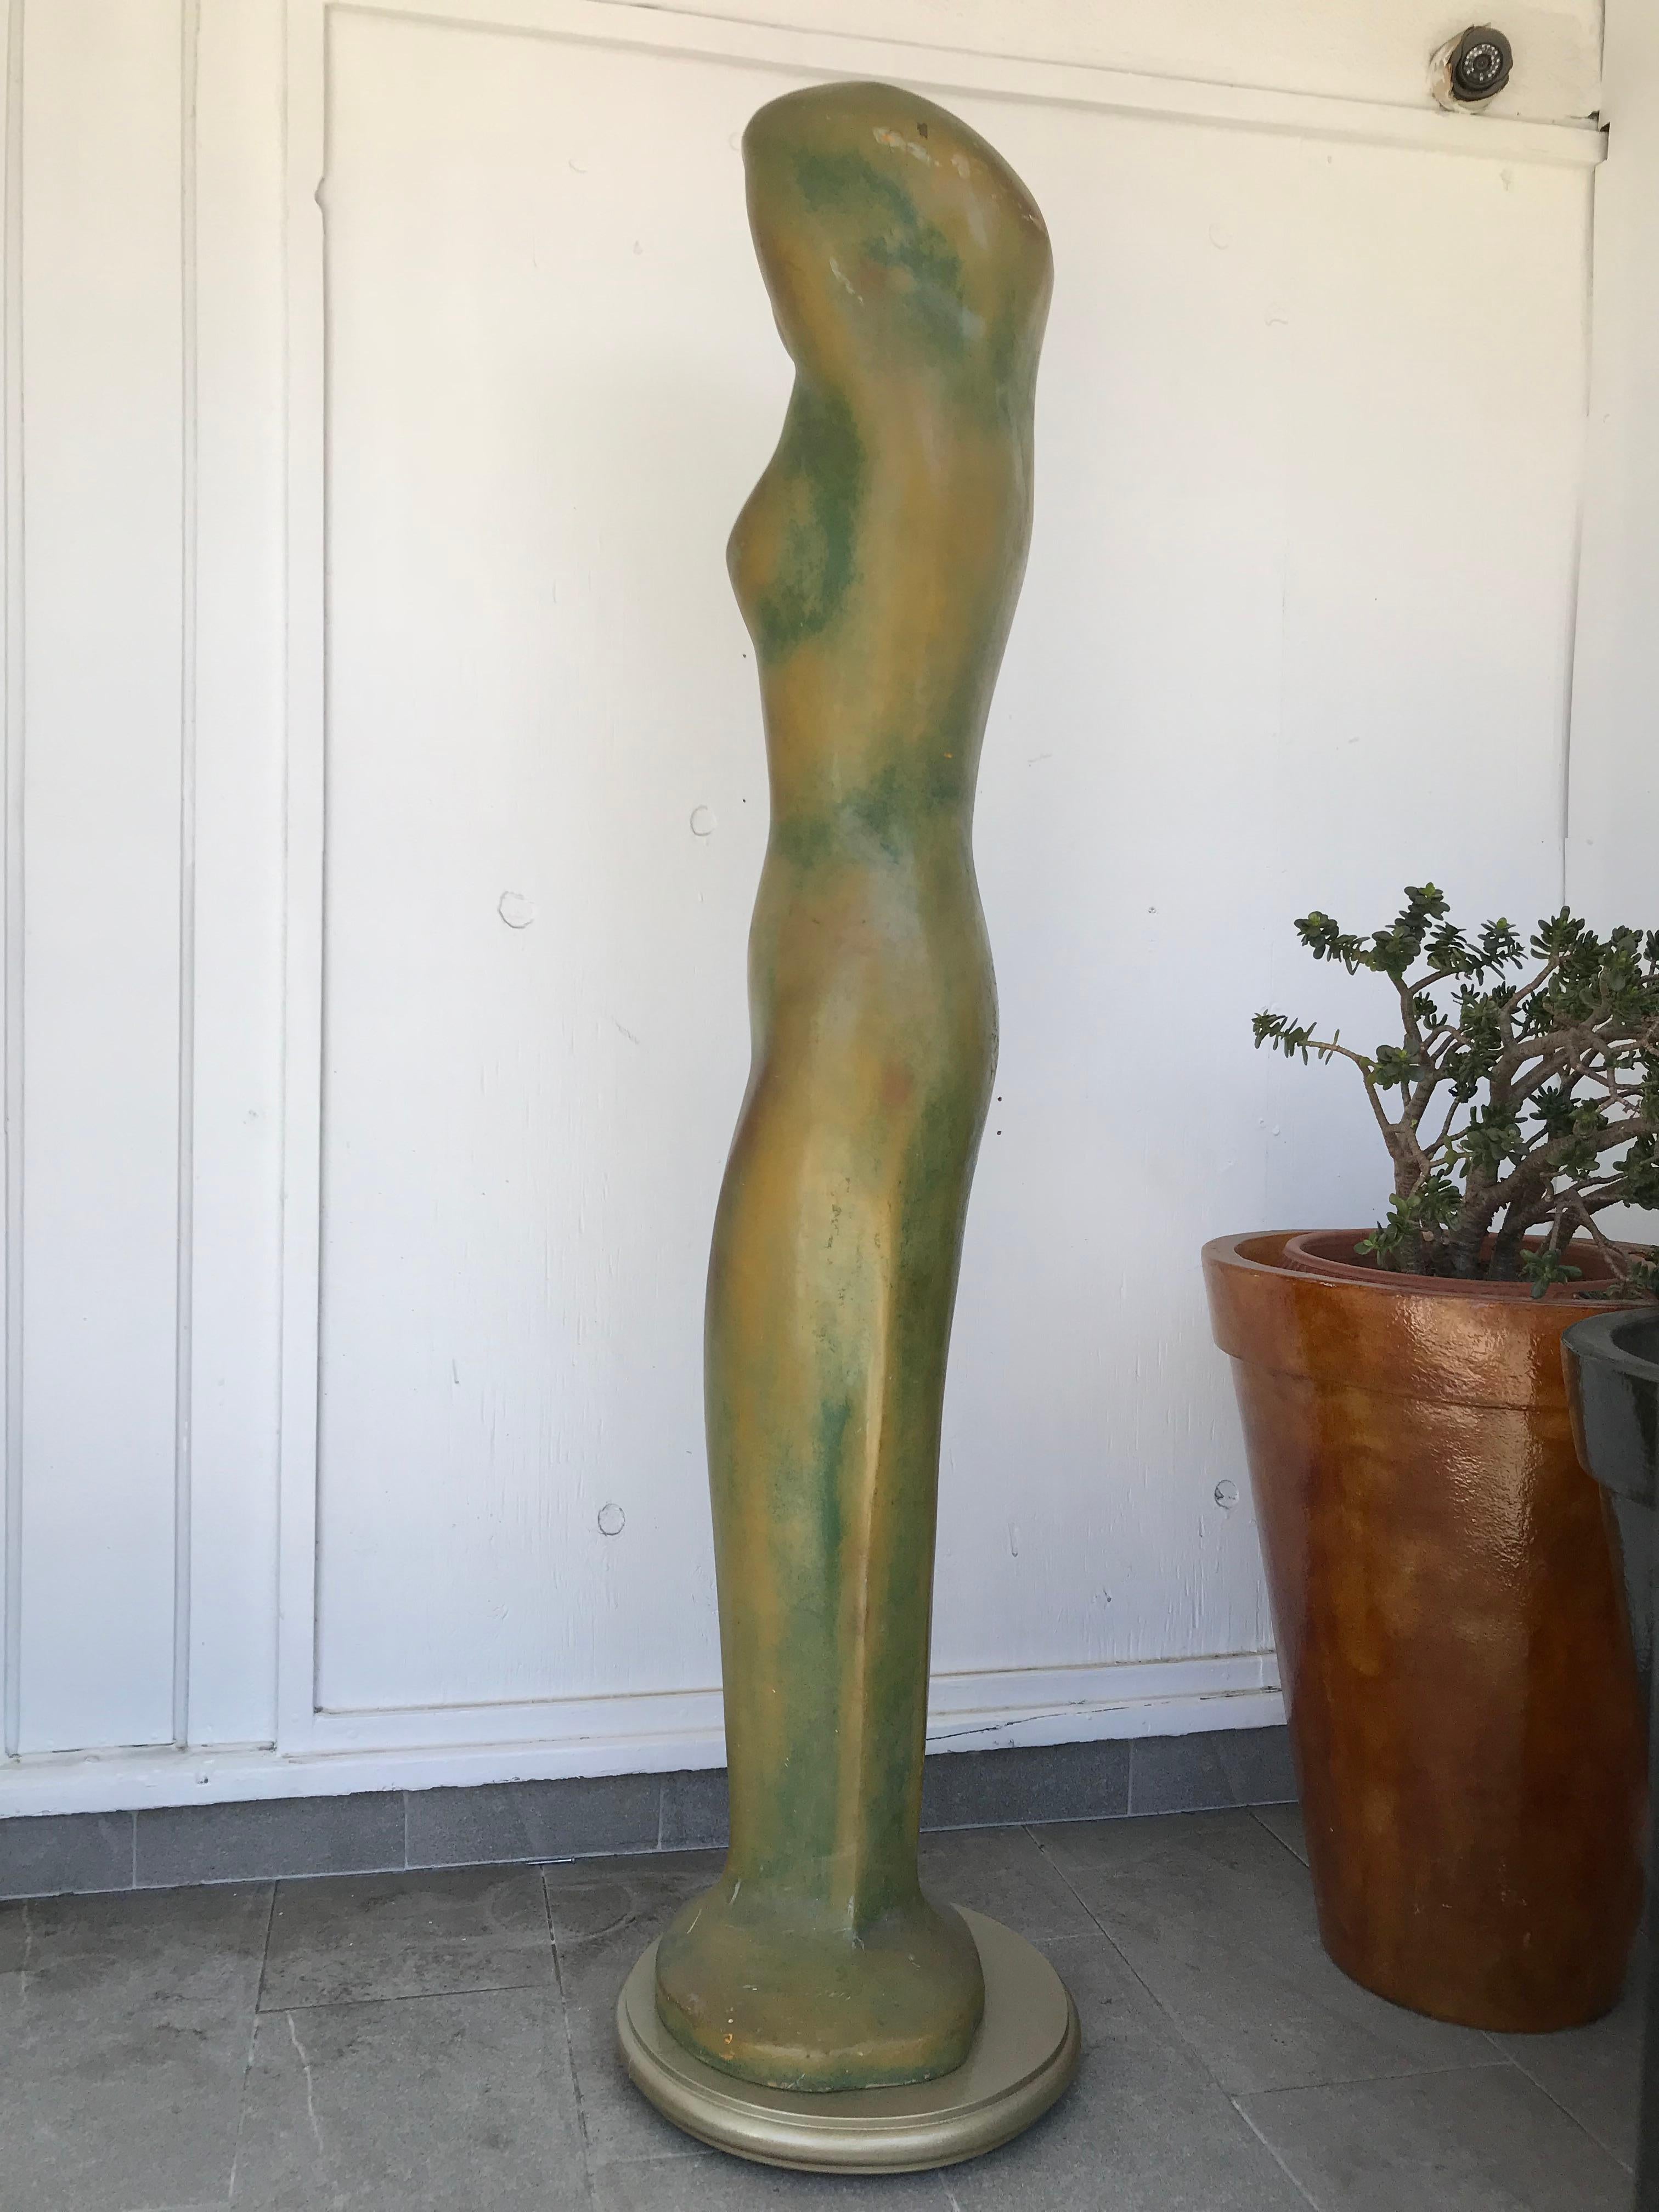 Impressive sinuous sculpture of a woman on a gilded wood base, signed by artist Istvan Toth.
Toth was a Hungarian artist who lived and worked in the Hollywood Hills from the 1960s through the 1990s.
Measures: Height is 73